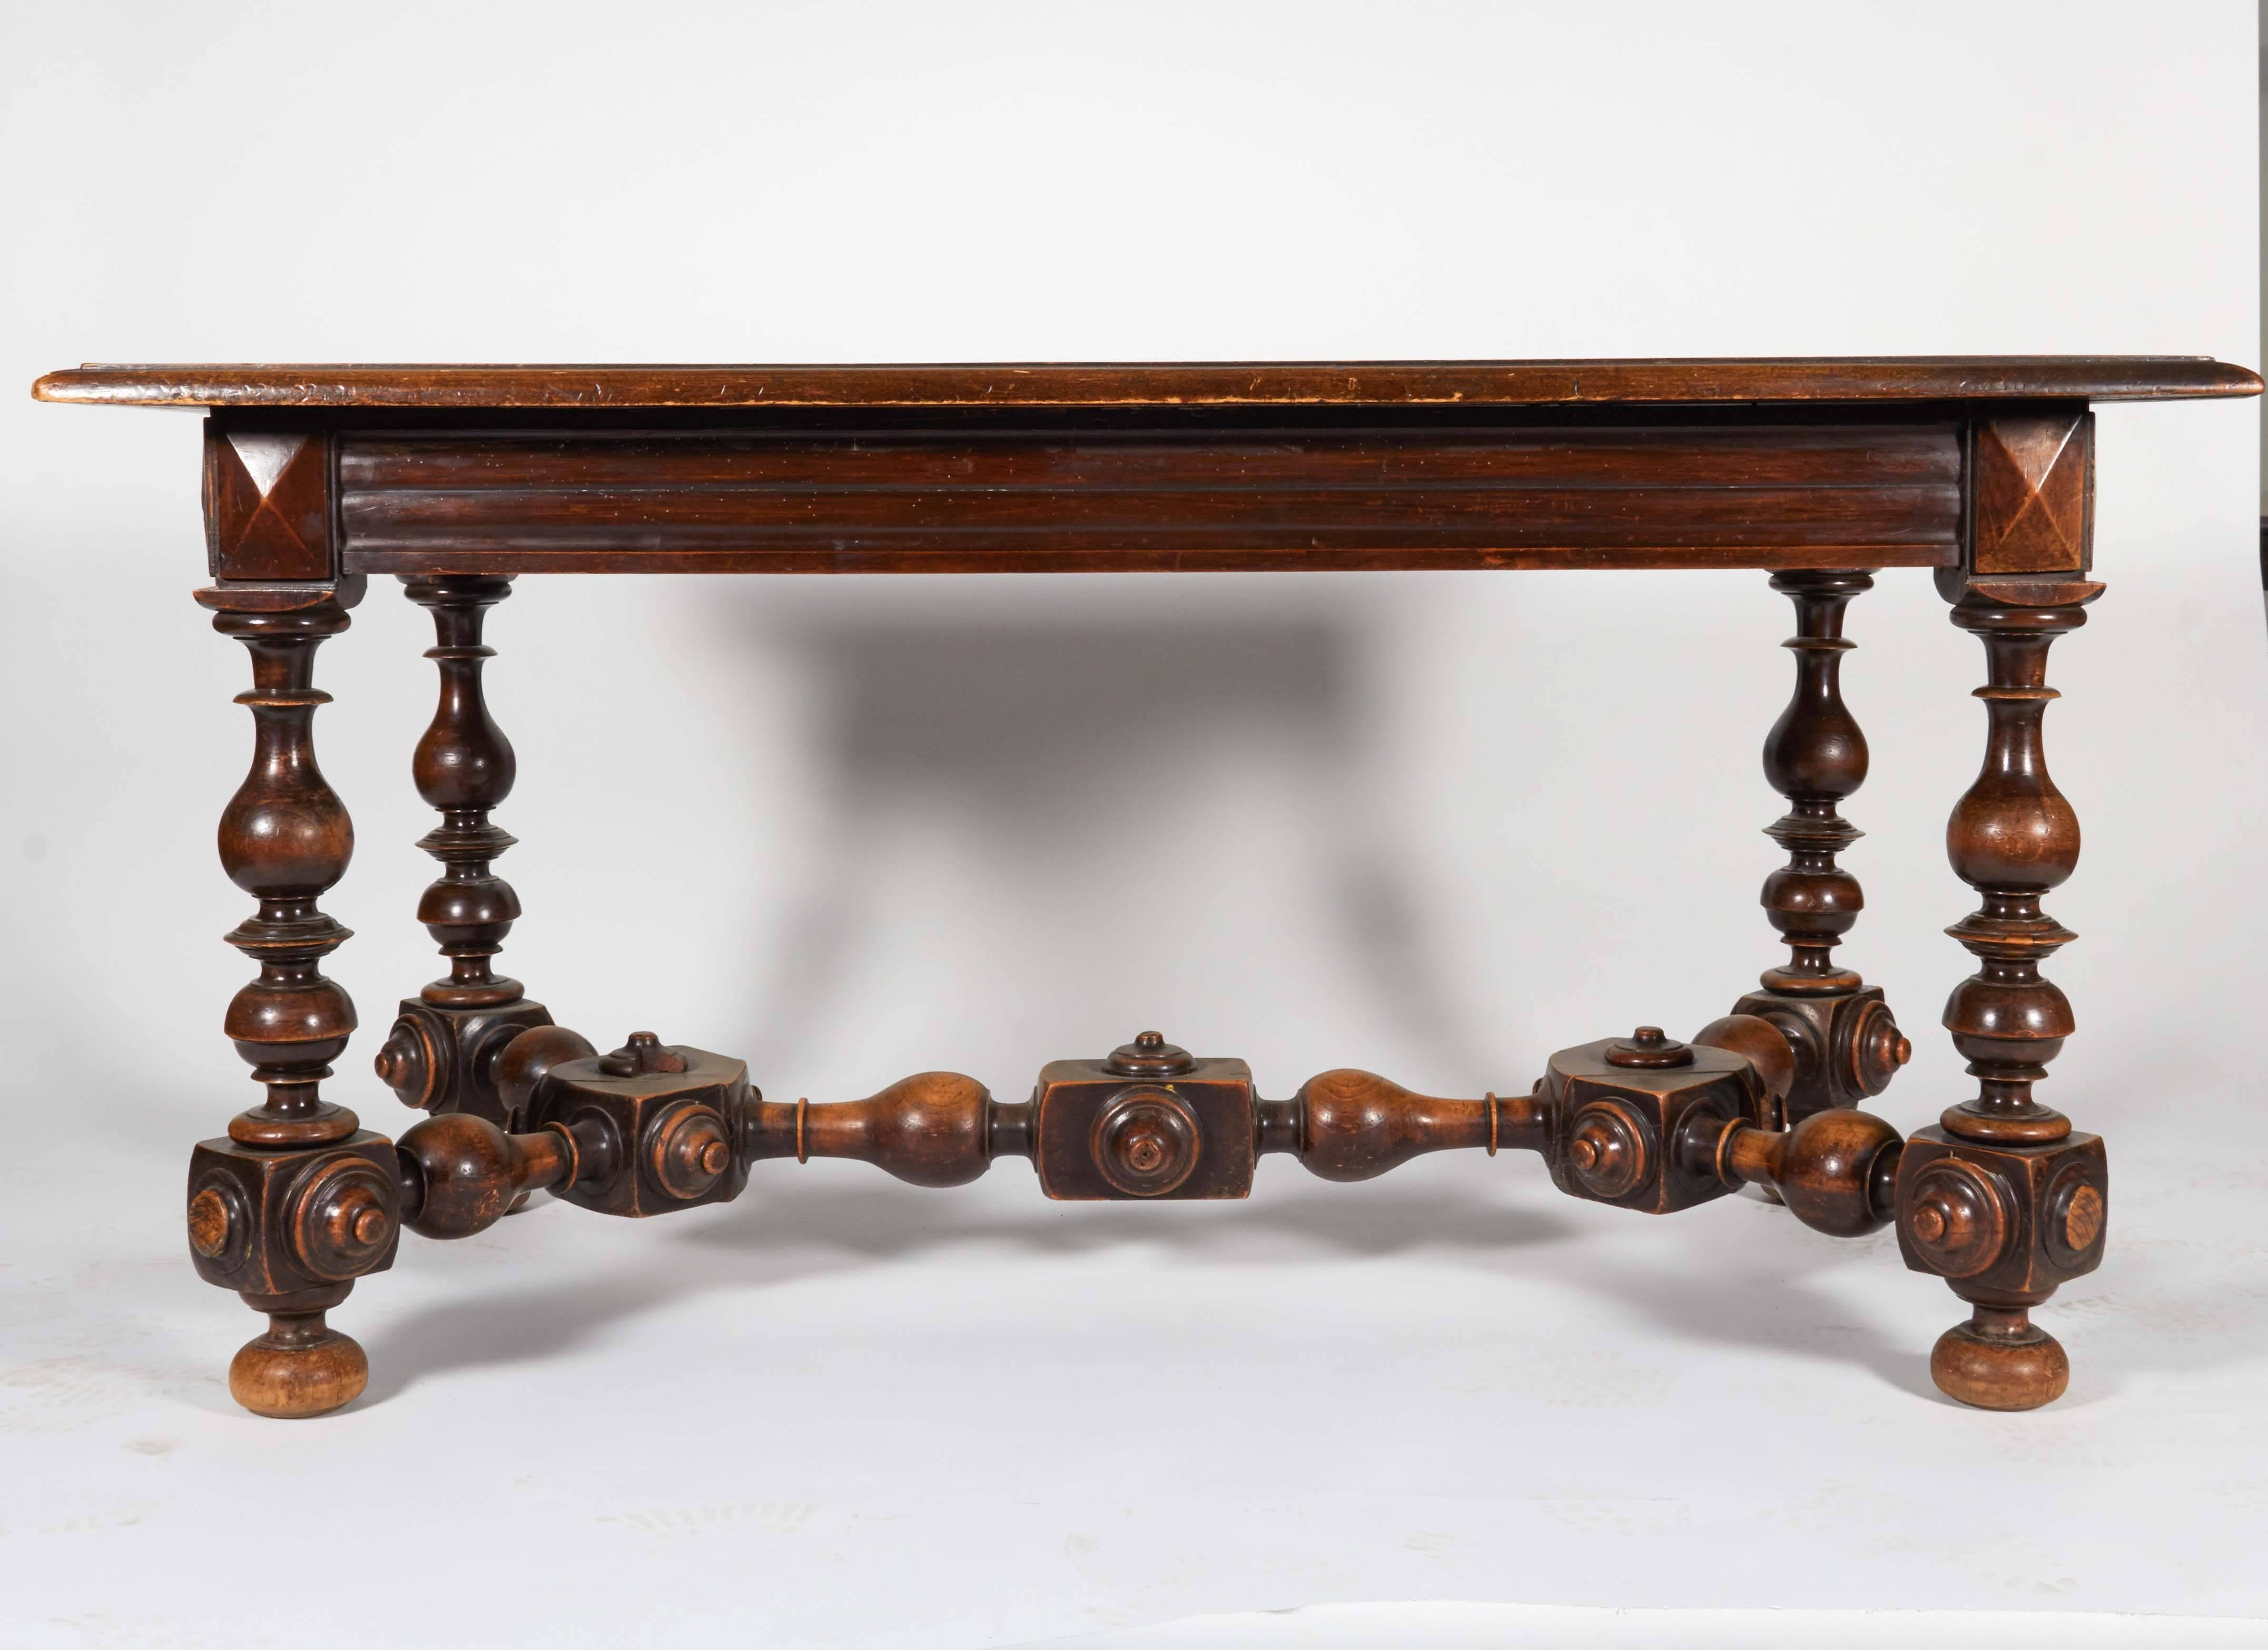 Ornate carved leg table with a gleaming finish. Perfect for a serving or console table.

Not available for sale or to ship in the state of California.